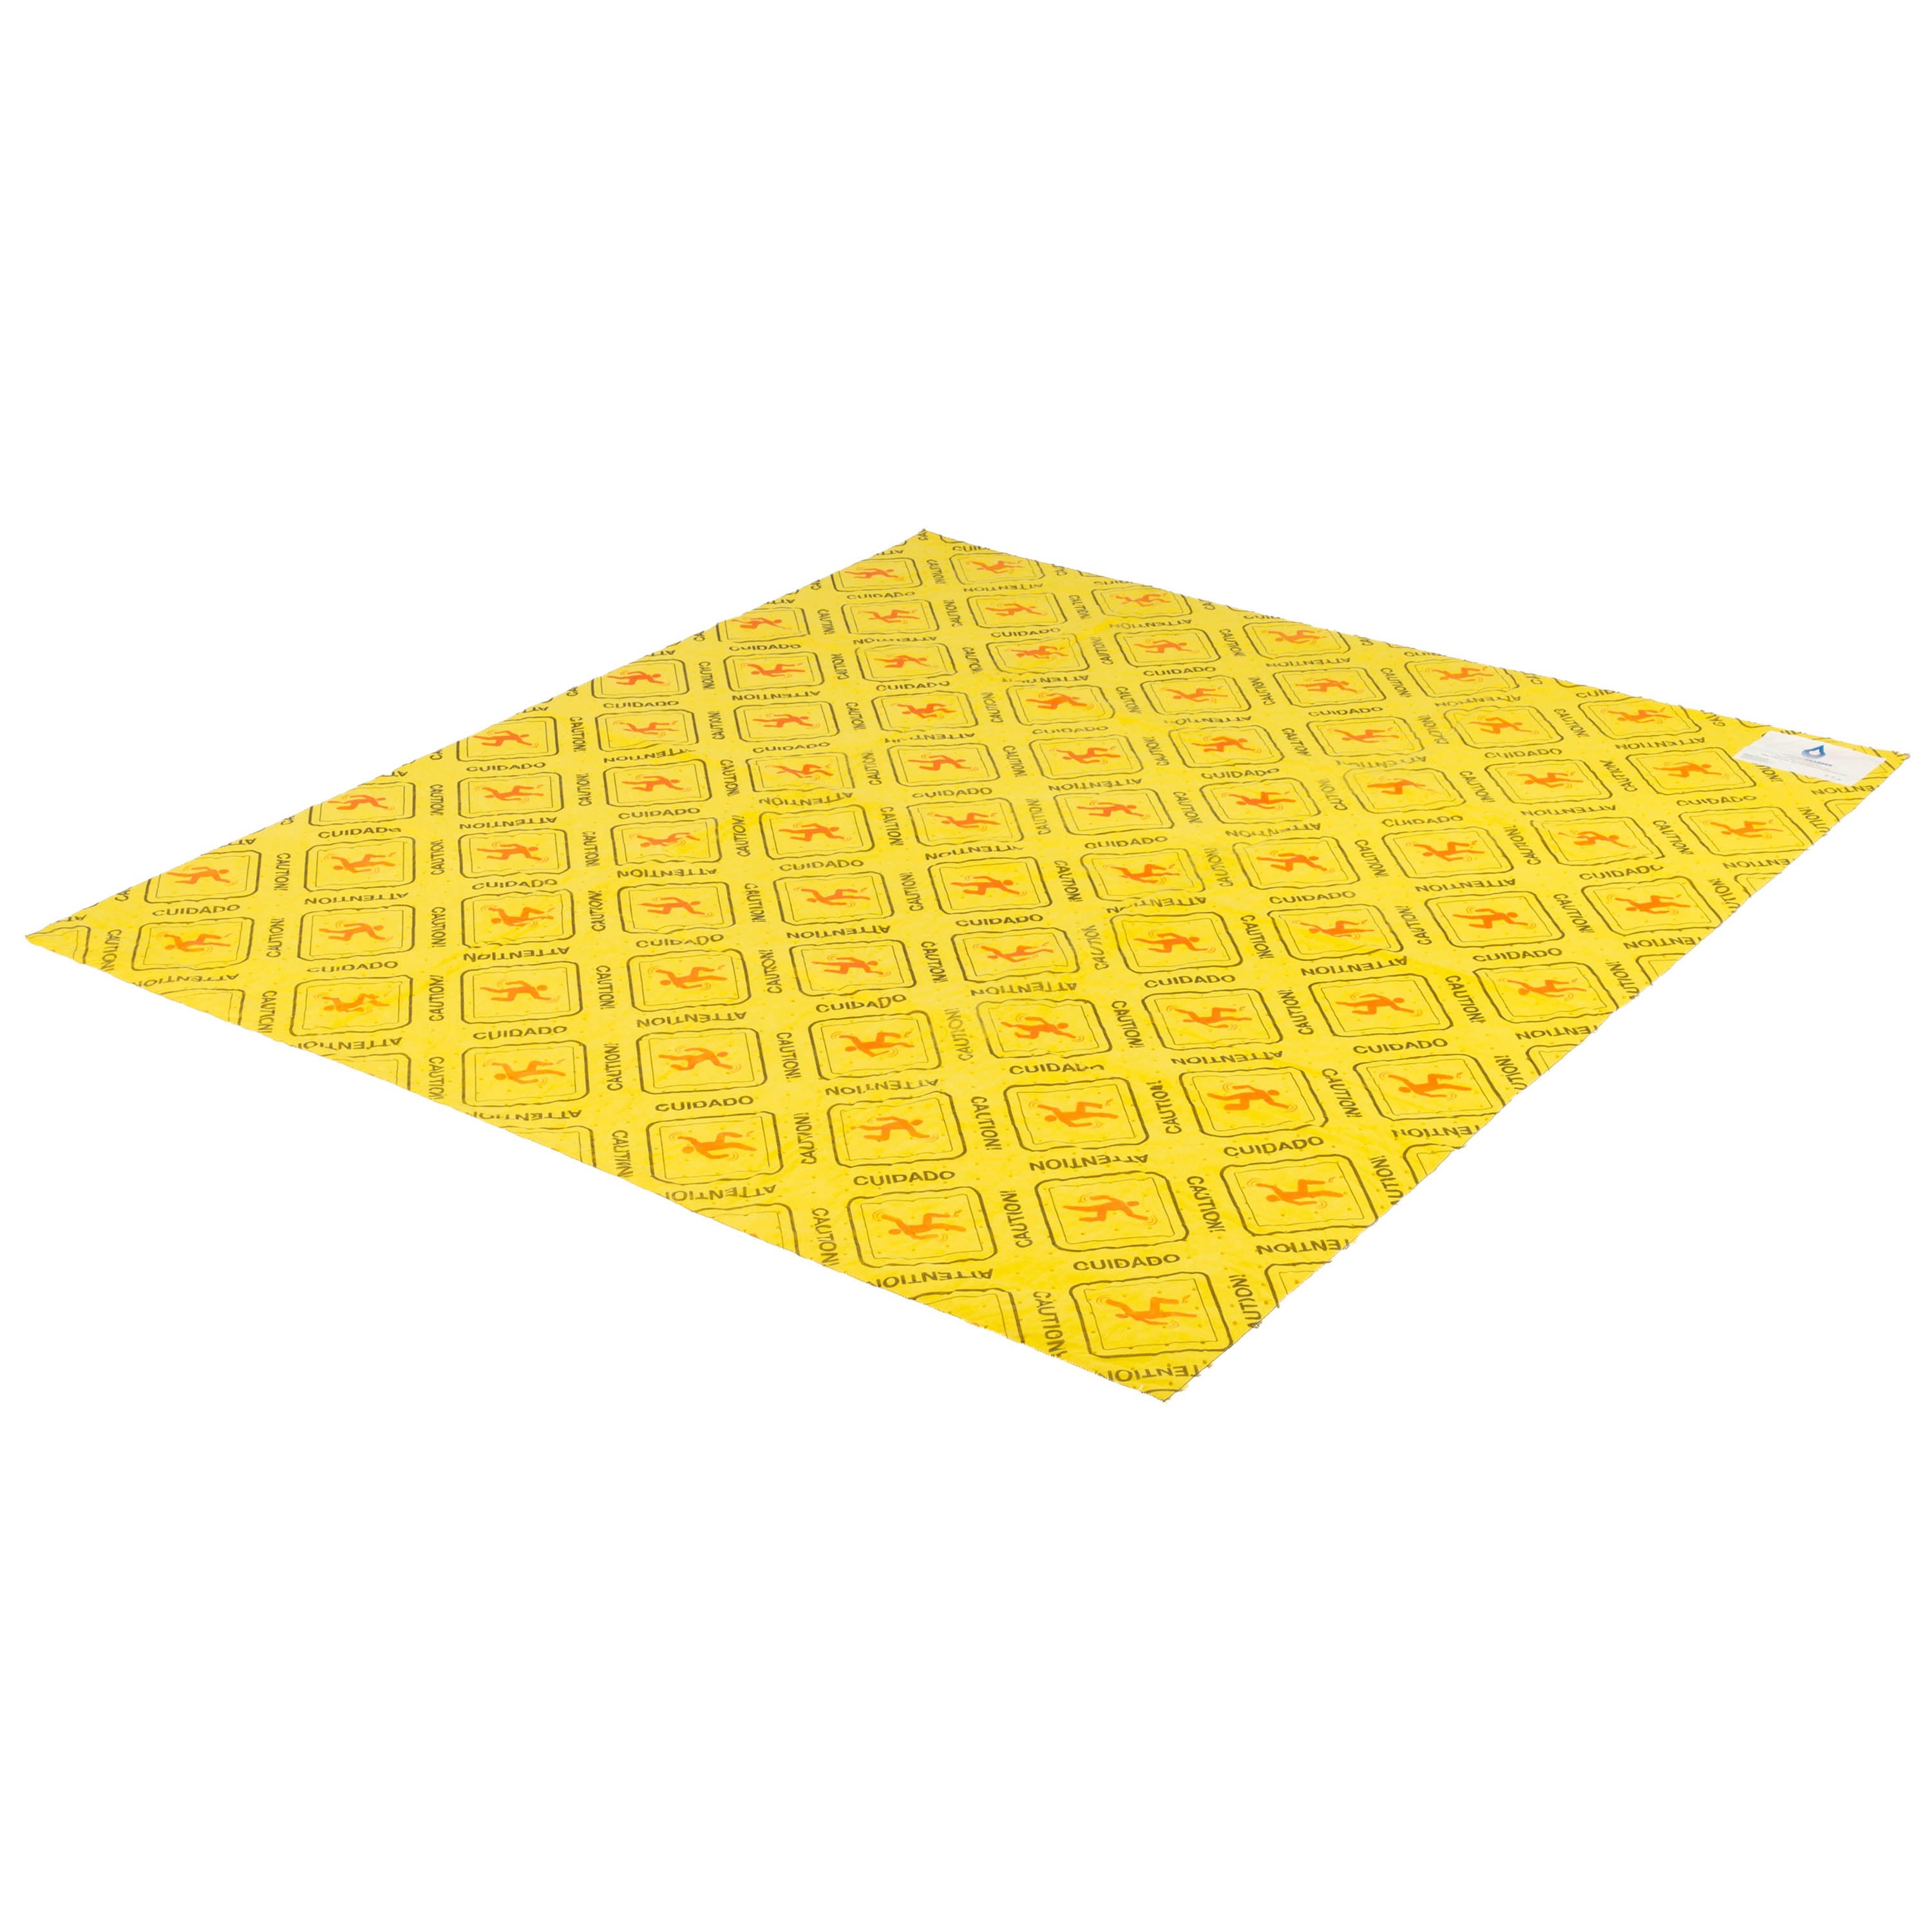 Green Absorbent Floor Mat for Surgery - Non-Sterile